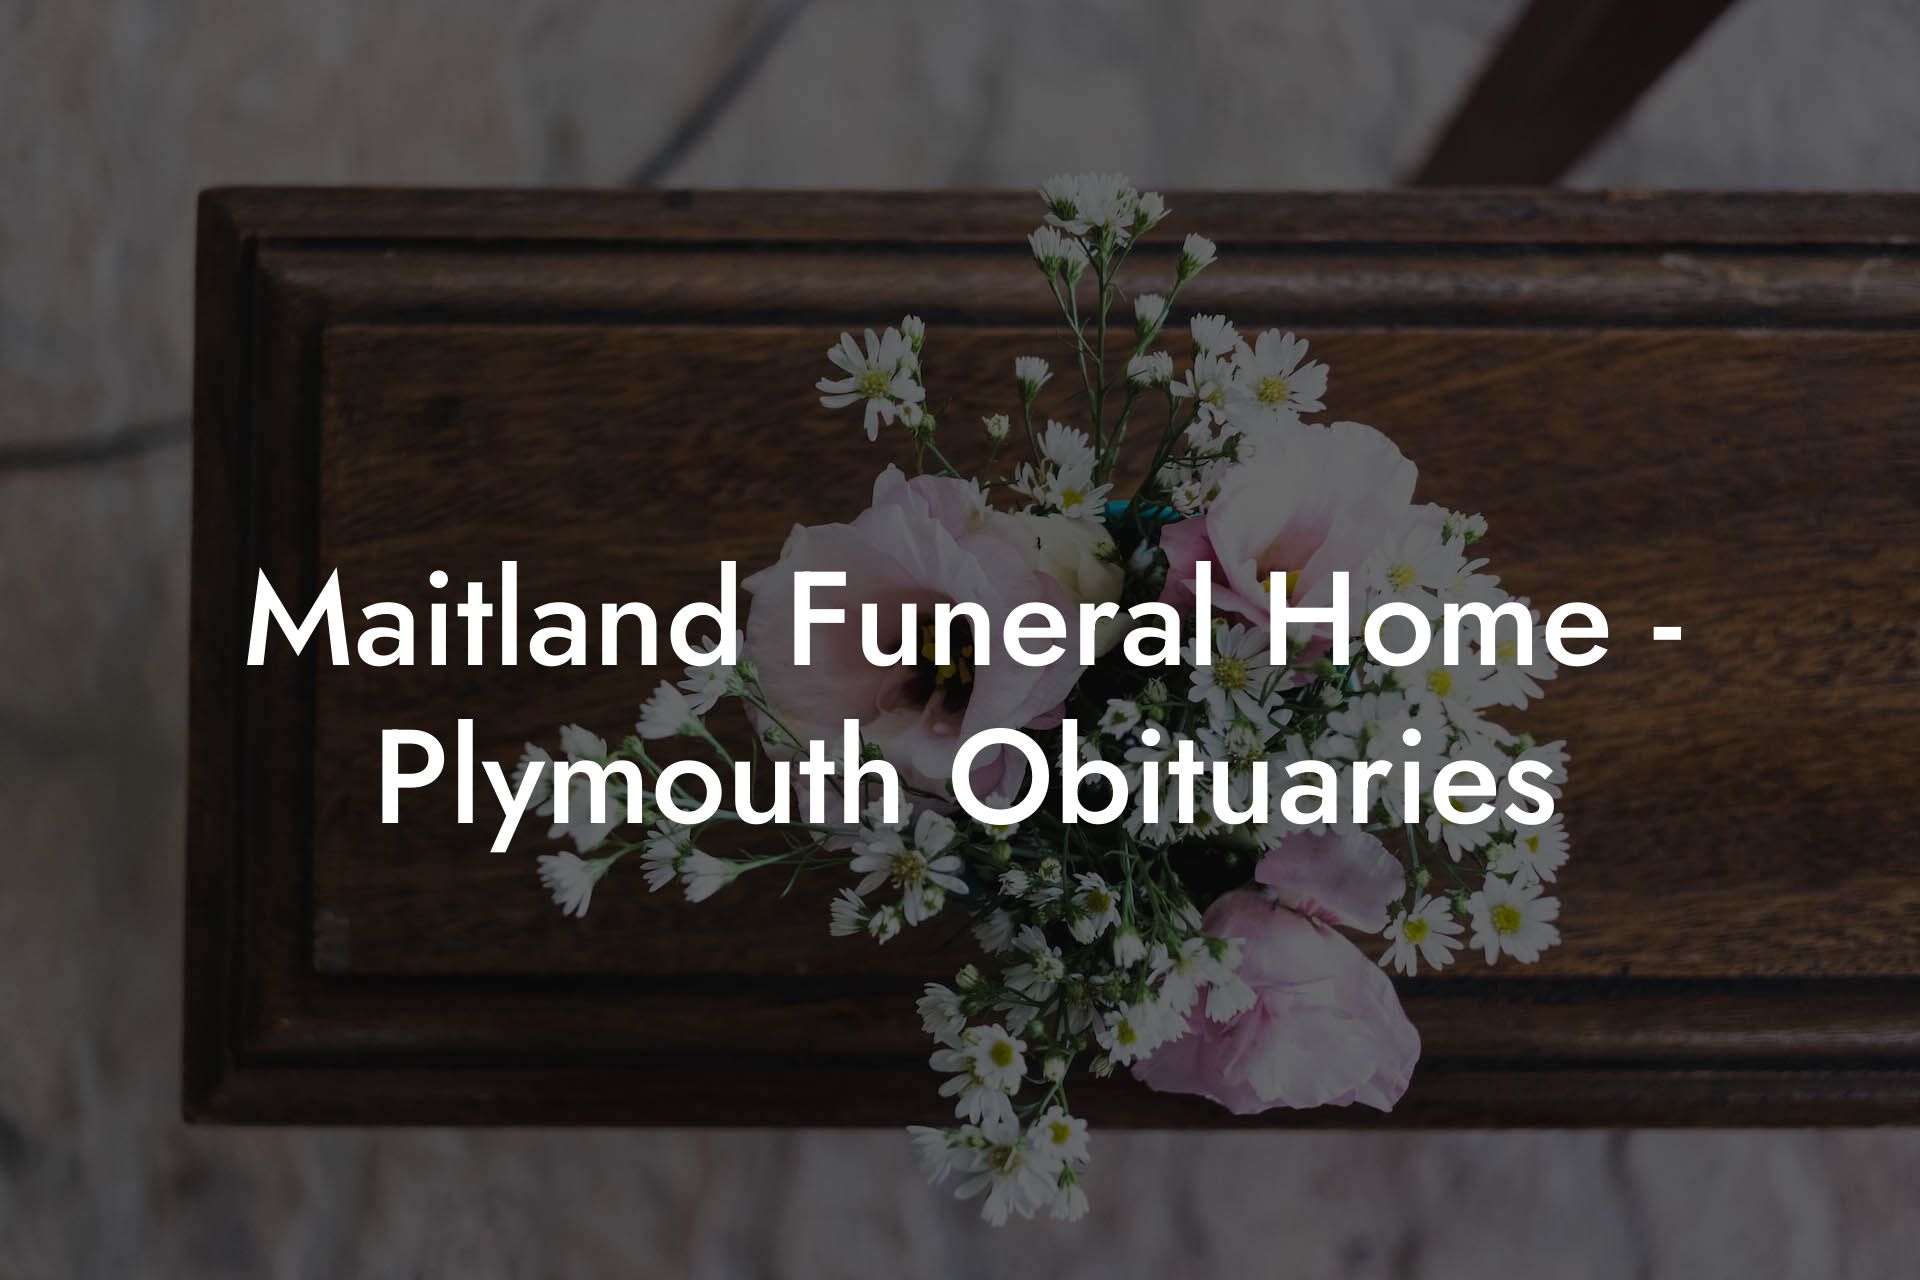 Maitland Funeral Home - Plymouth Obituaries